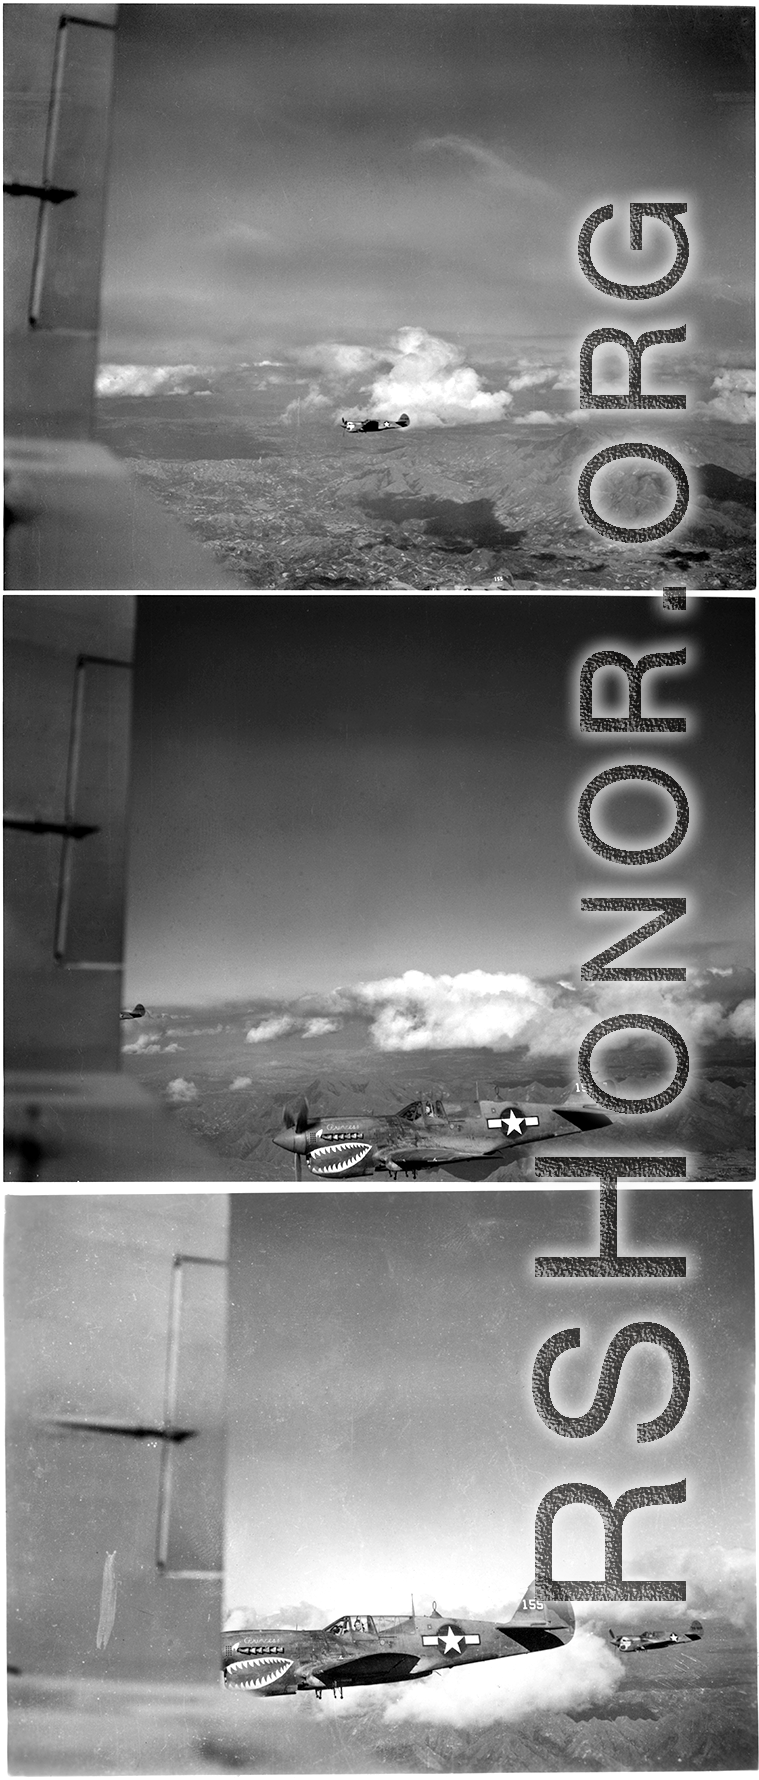 Images of escorting P-40 Warhawks with a painted shark's mouth somewhere over southern China, Indochina, or Burma during WWII, as taken from the tail gunner's window on a B-25 bomber.  Close in is the P-40 nicknamed "Princess," tail number 155.  Who is this man in the cockpit?  This plane is likely of 75th Fighter Squadron, 23rd Fighter Group.